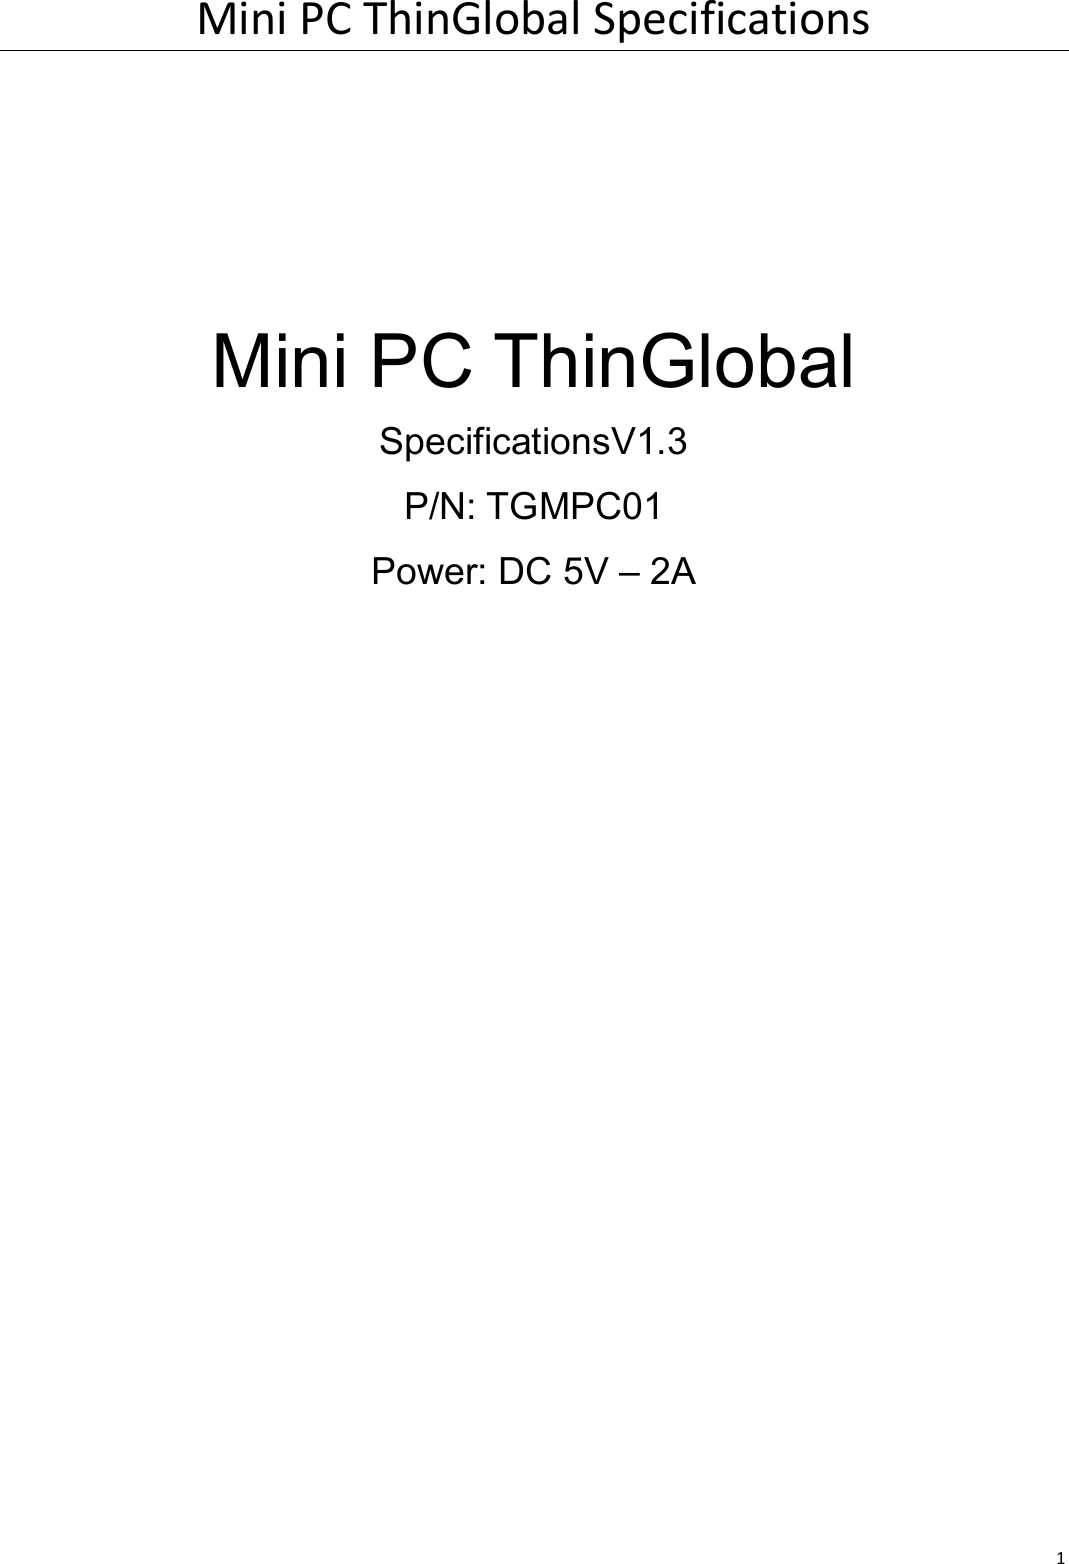 MiniPCThinGlobalSpecifications1    Mini PC ThinGlobal SpecificationsV1.3 P/N: TGMPC01 Power: DC 5V – 2A       